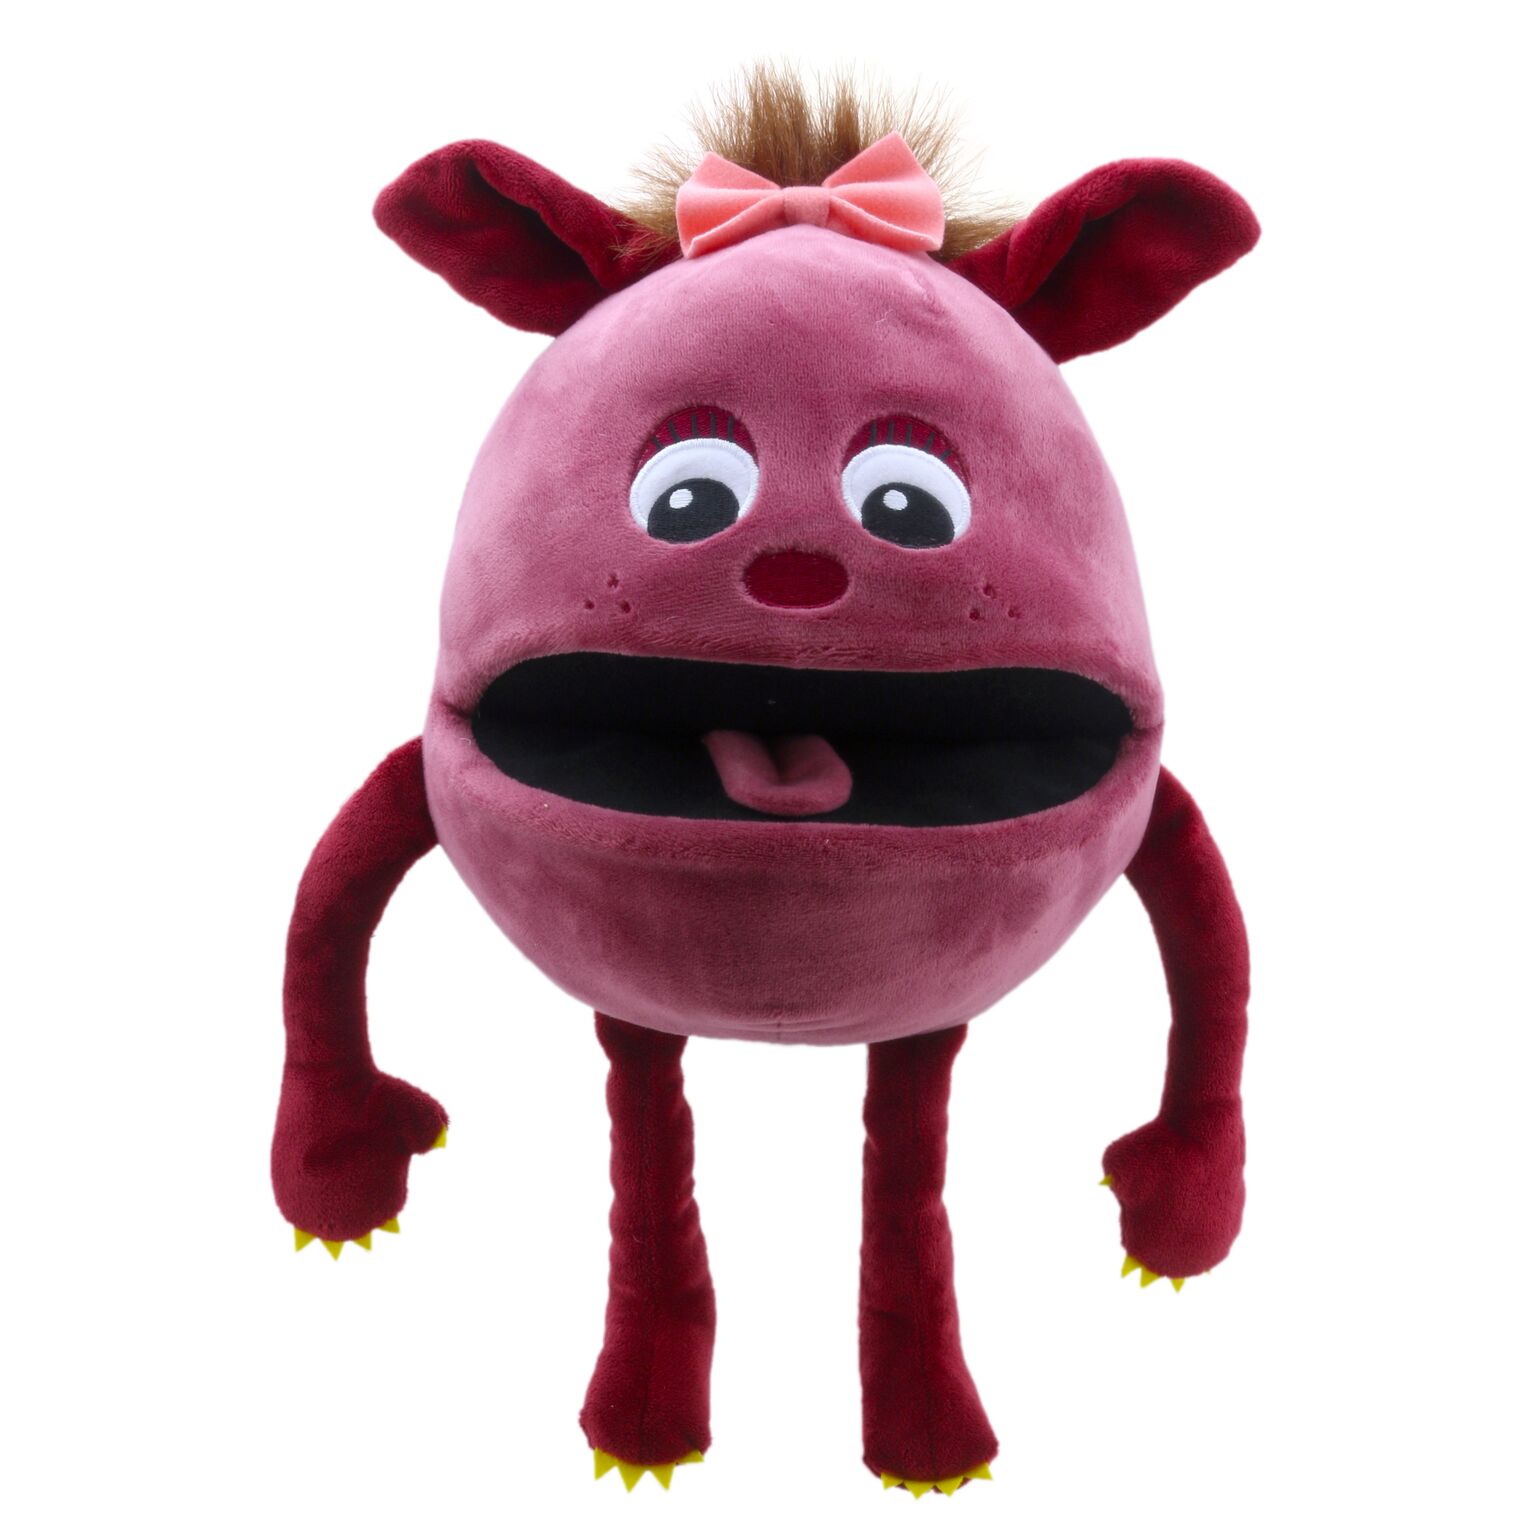 Hand puppet baby monster - raspberry - Puppet Company